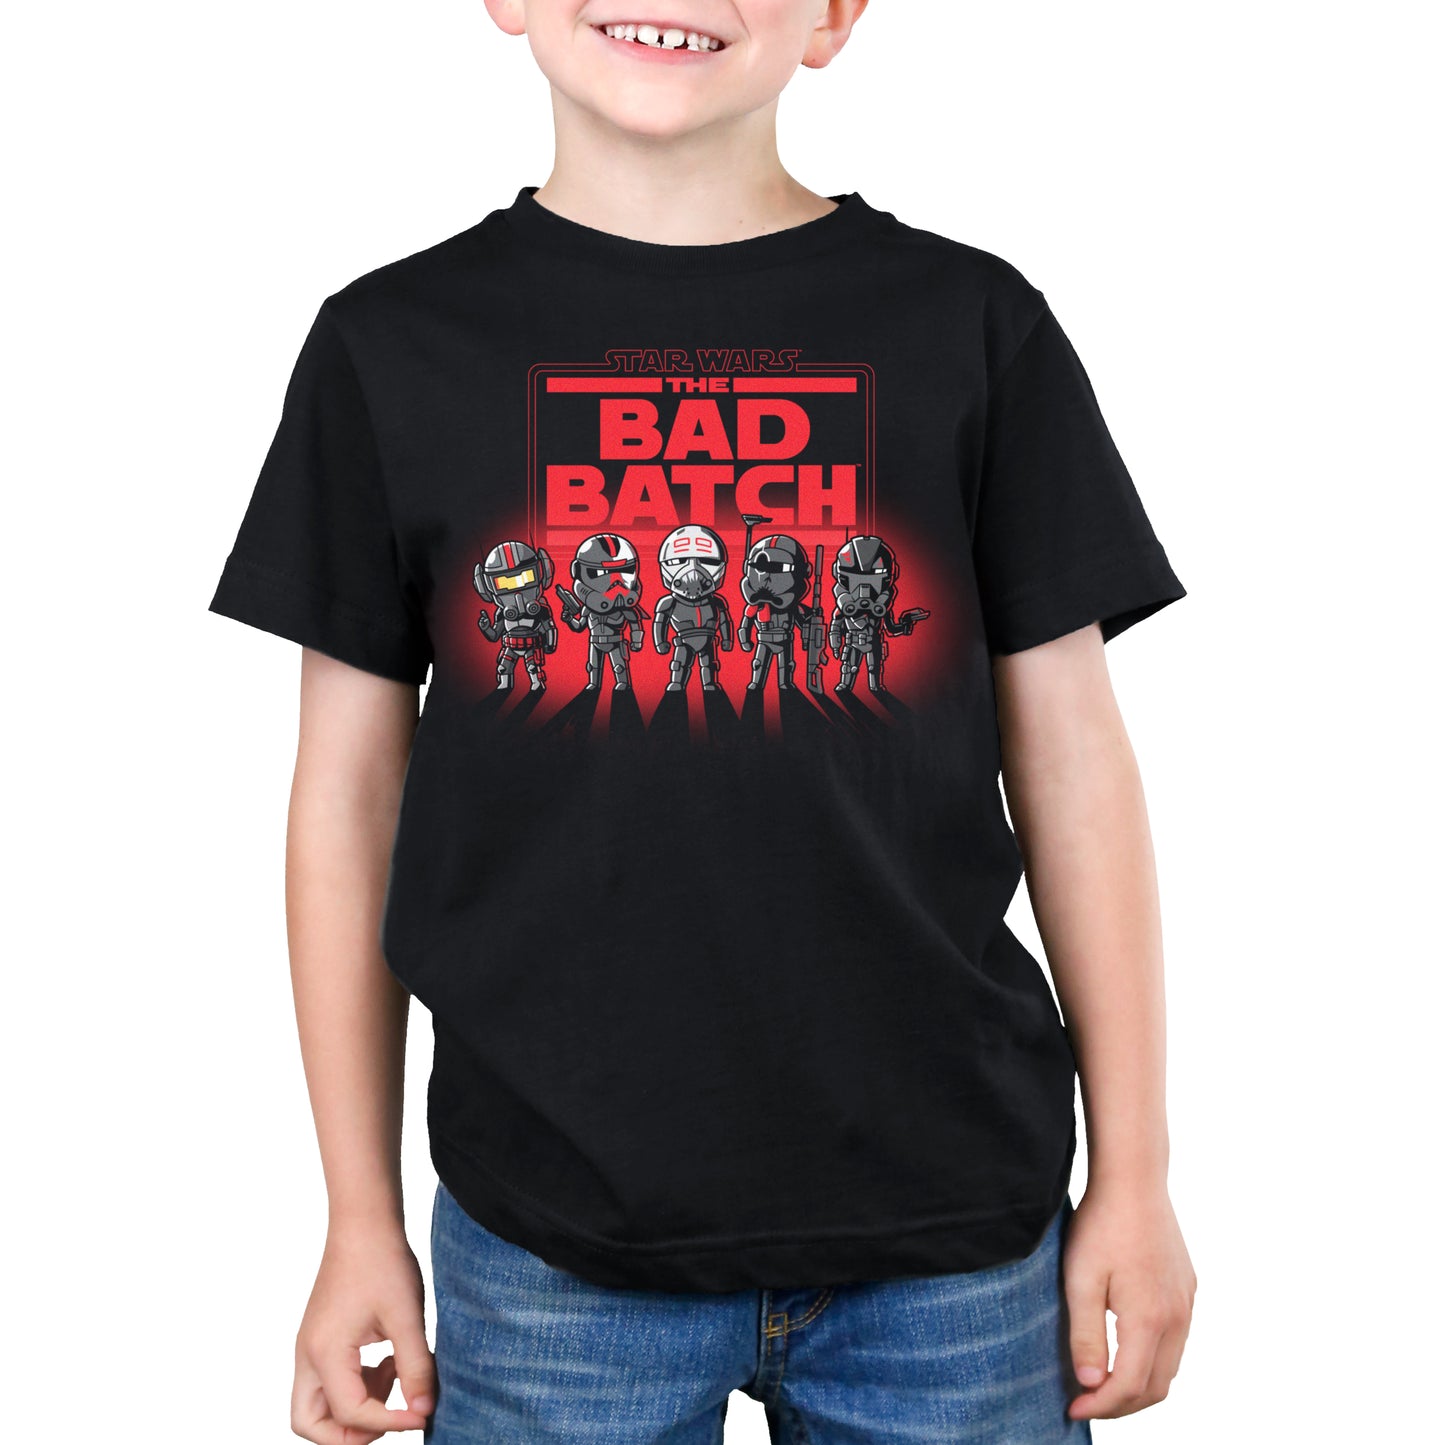 Officially licensed Star Wars Bad Batch Lineup t-shirt featuring Clone Force 99.